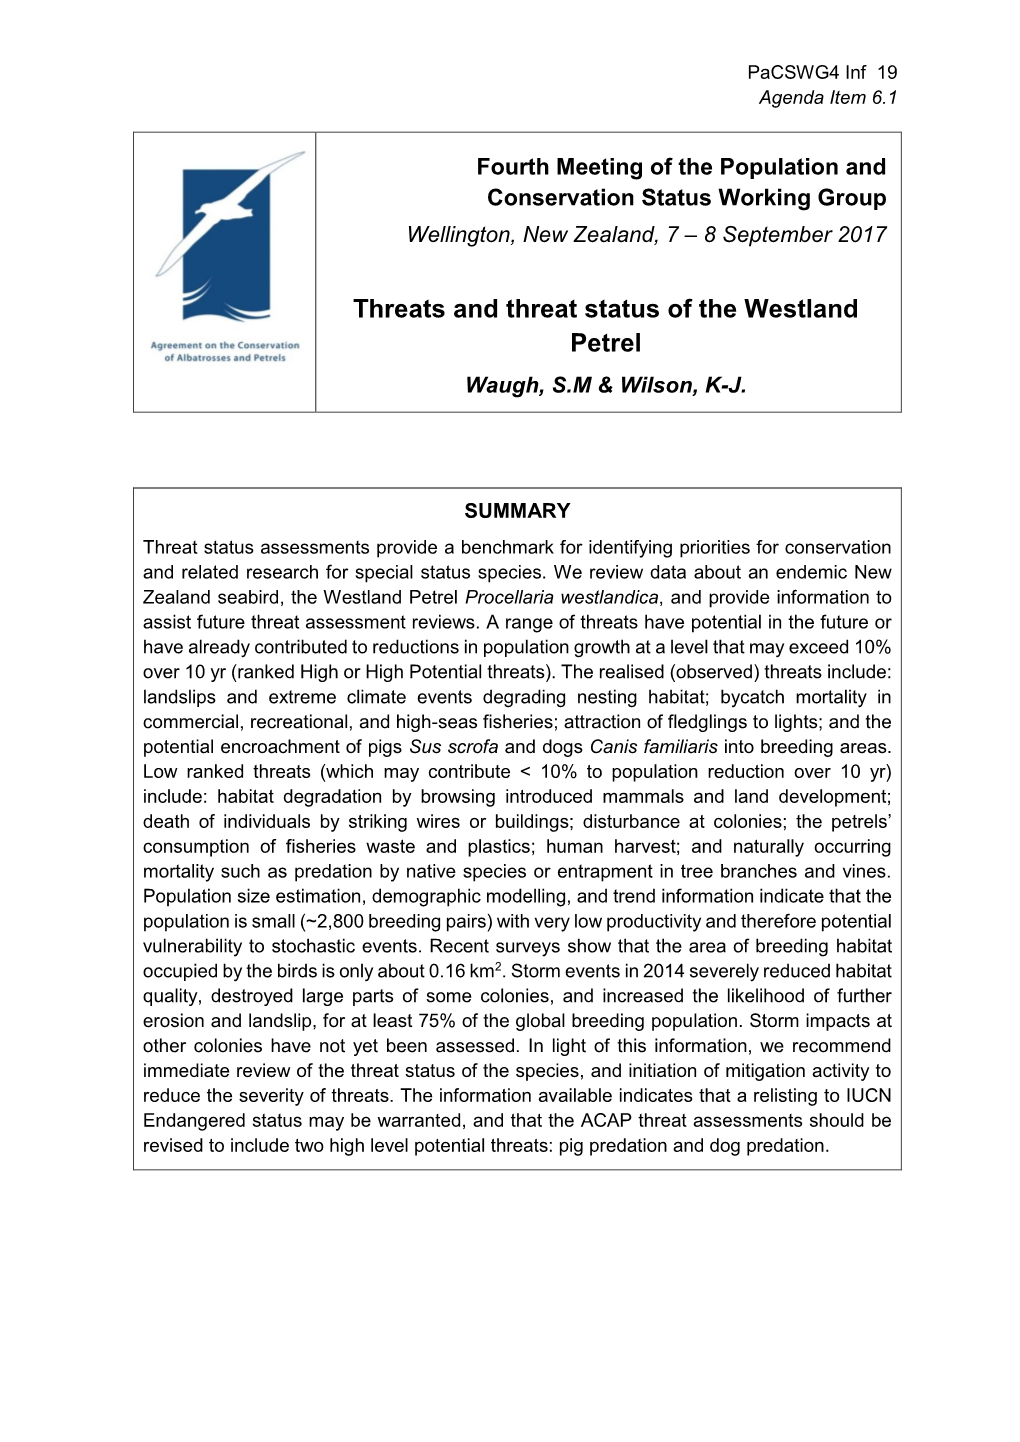 Threats and Threat Status of the Westland Petrel